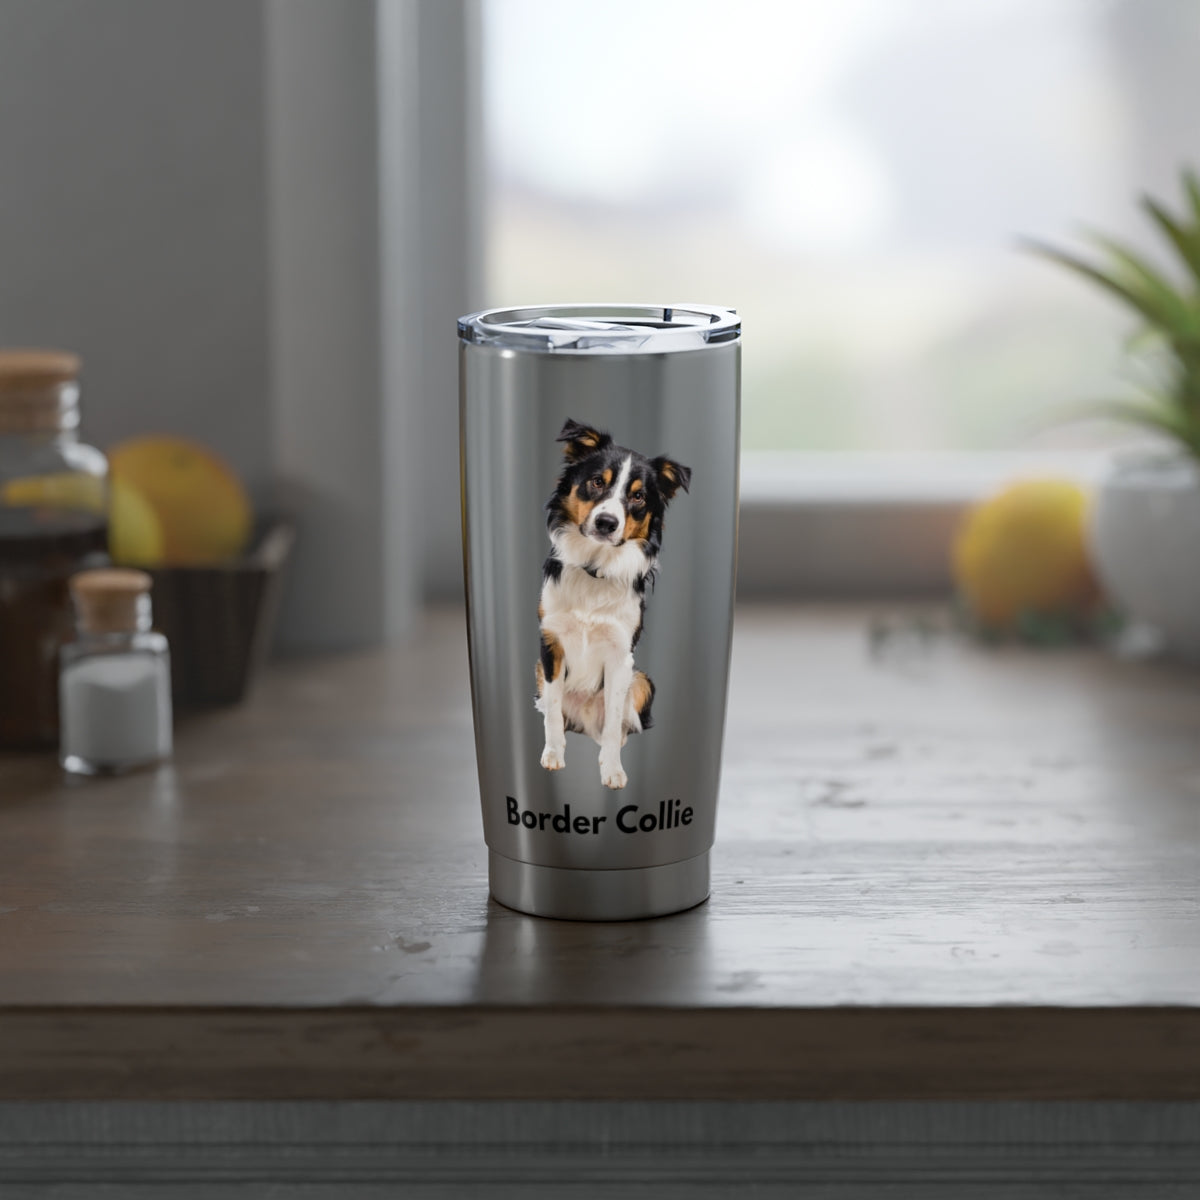 Border Collie 20 oz tumbler, stainless steel, practical drink carrier, fits in car drink holder - The Dapper Dogg